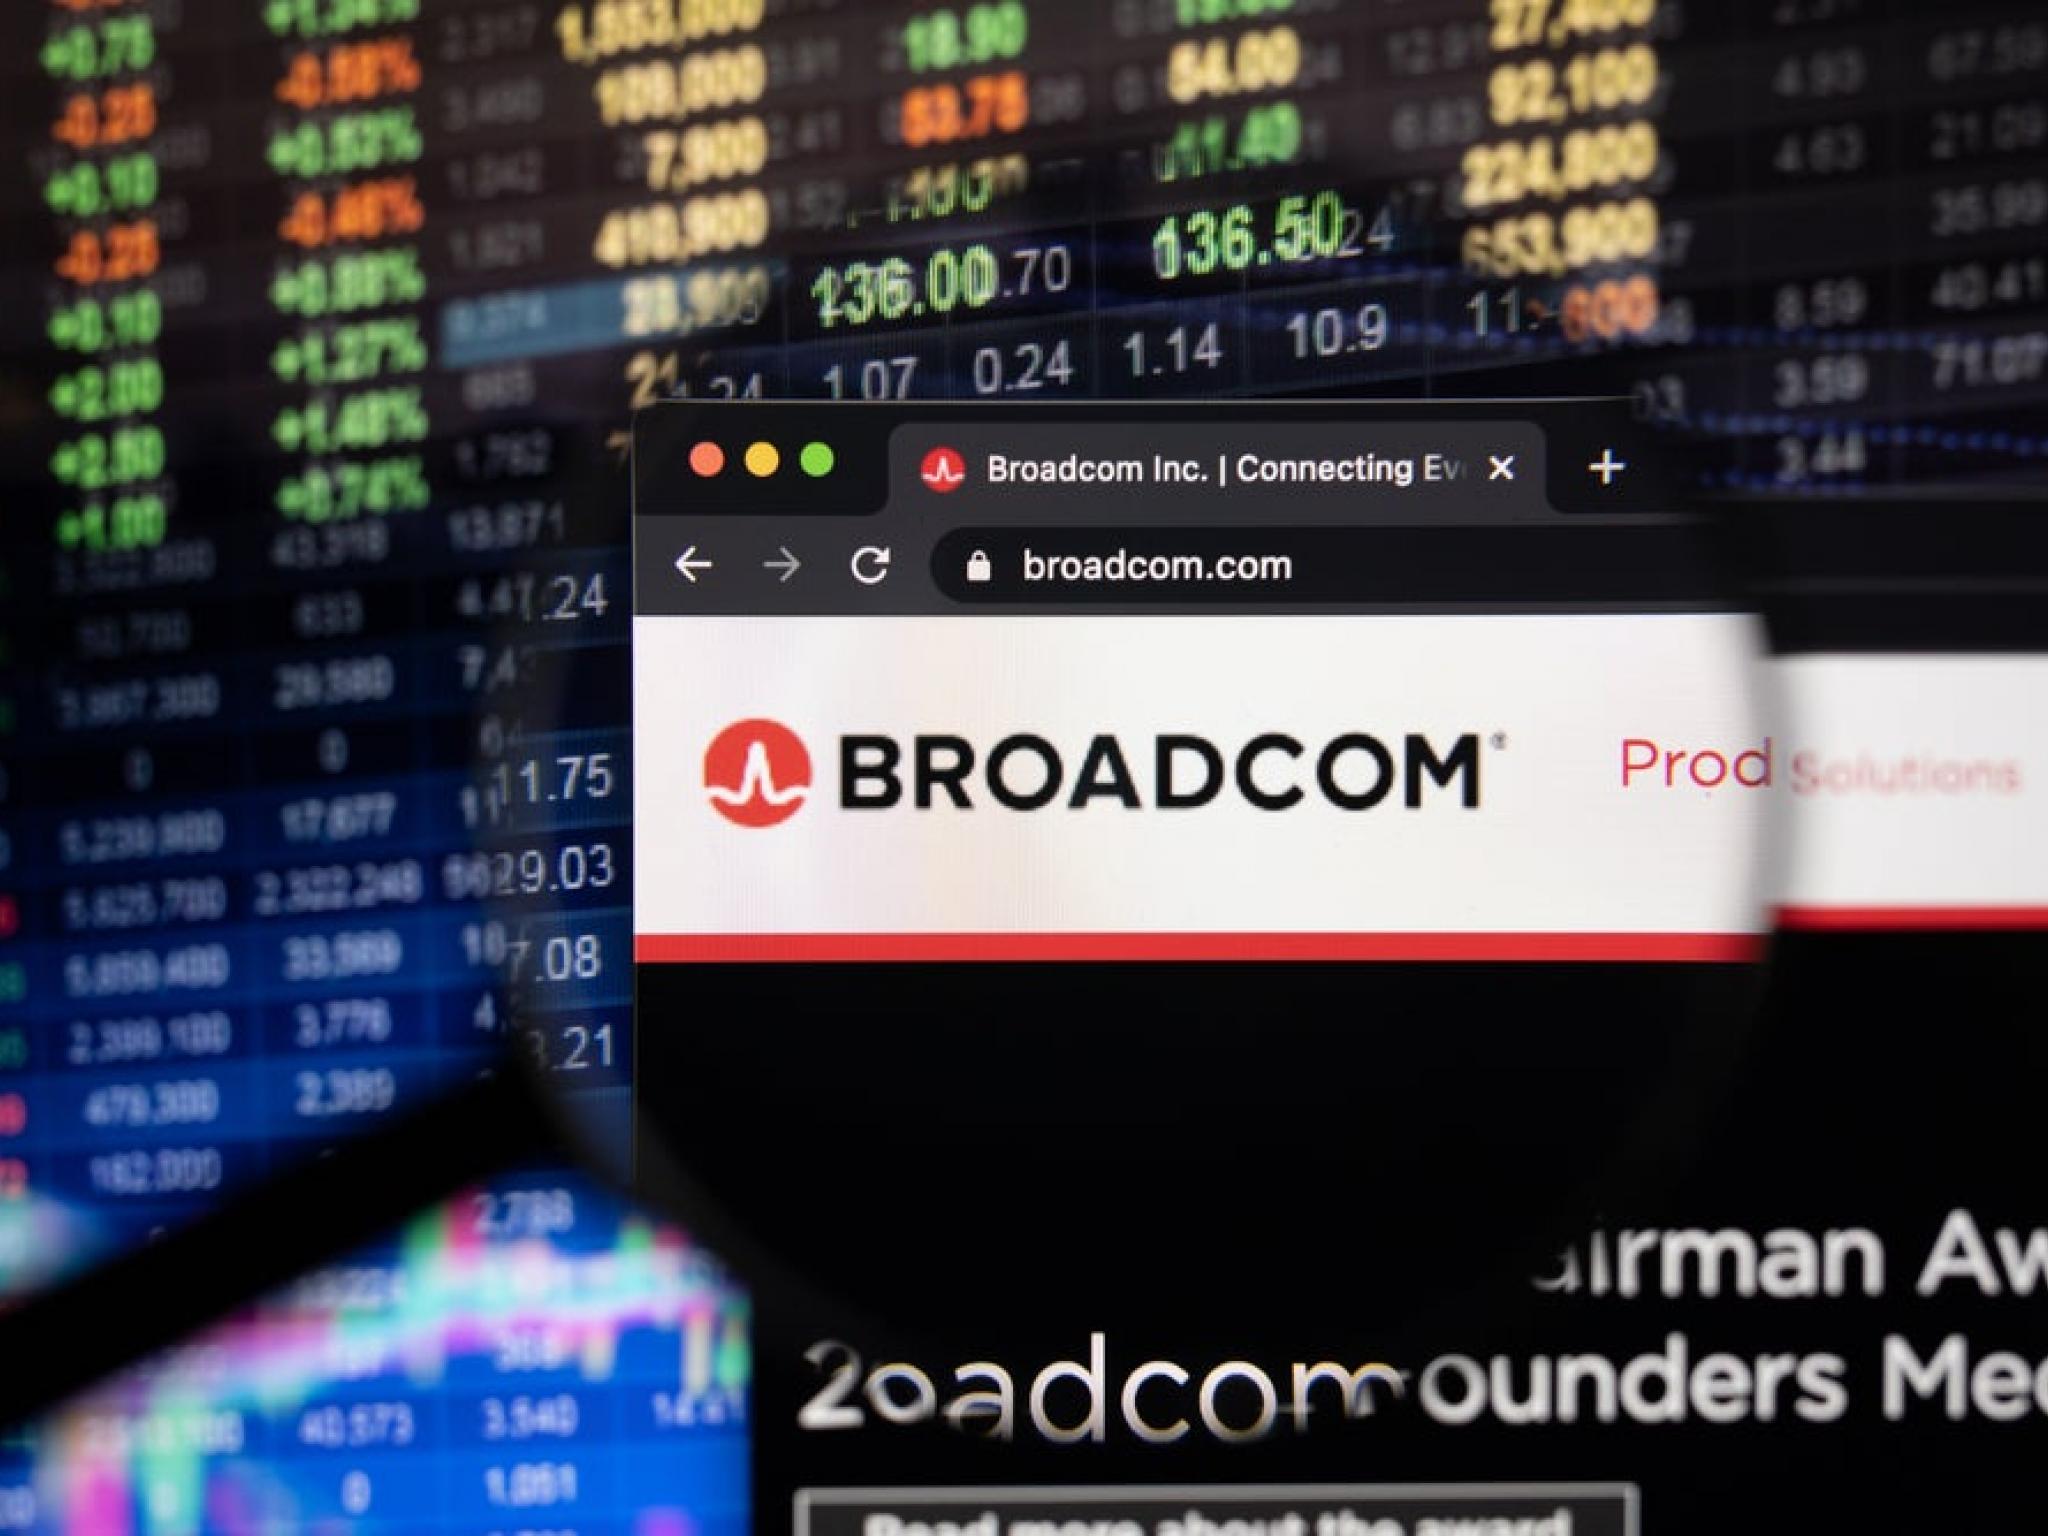  broadcom-shares-are-surging-what-you-need-to-know 